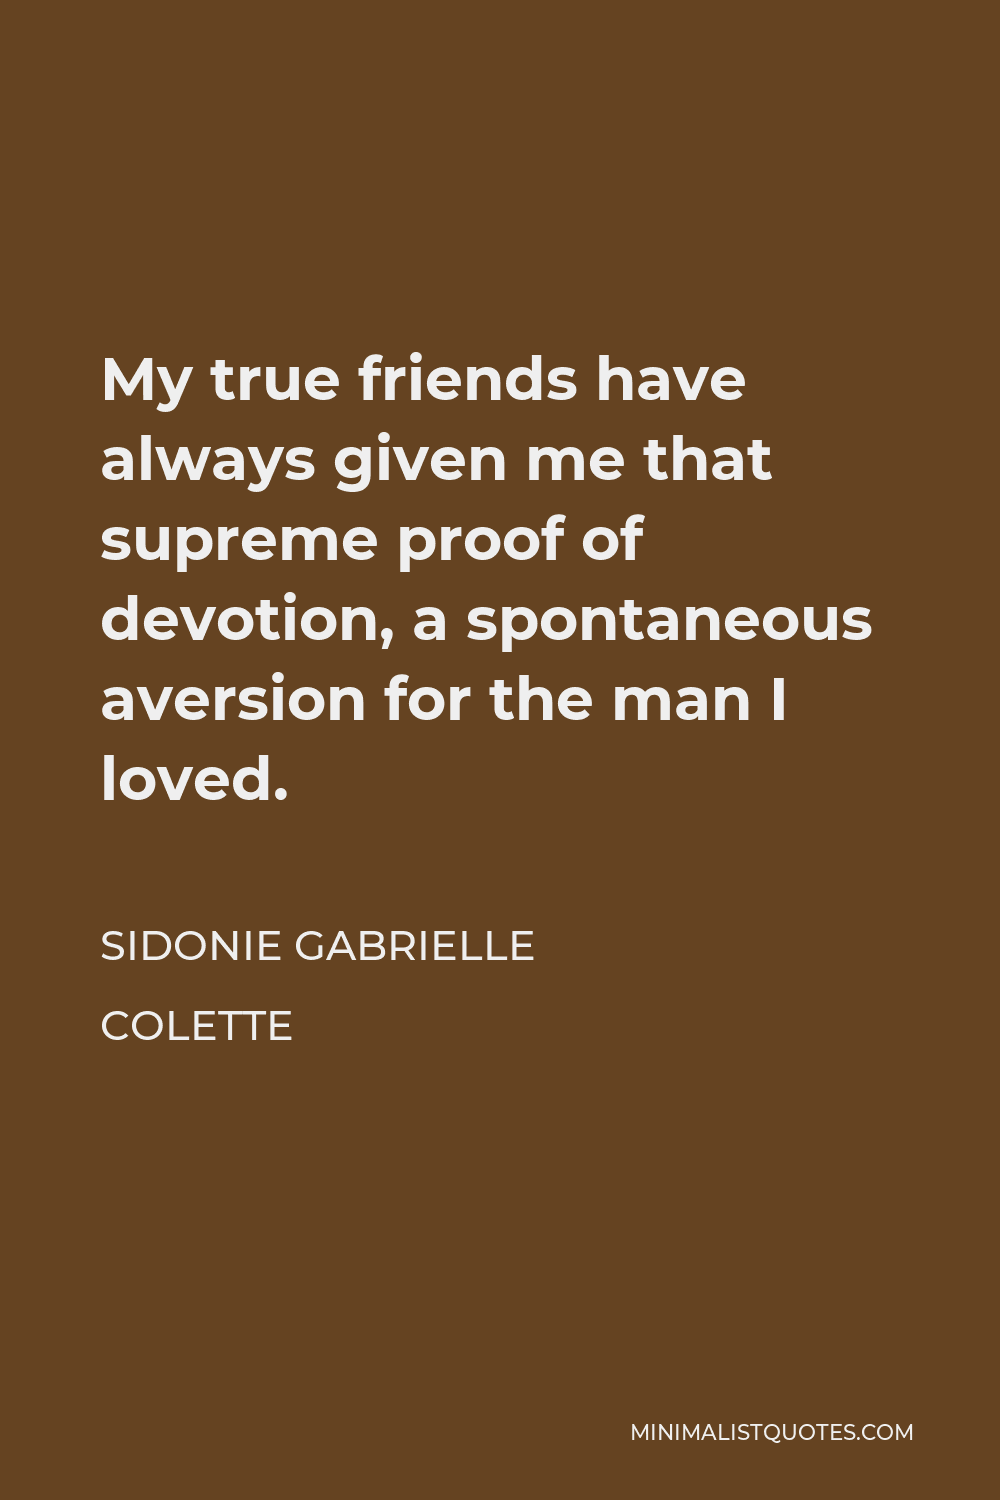 Sidonie Gabrielle Colette Quote - My true friends have always given me that supreme proof of devotion, a spontaneous aversion for the man I loved.